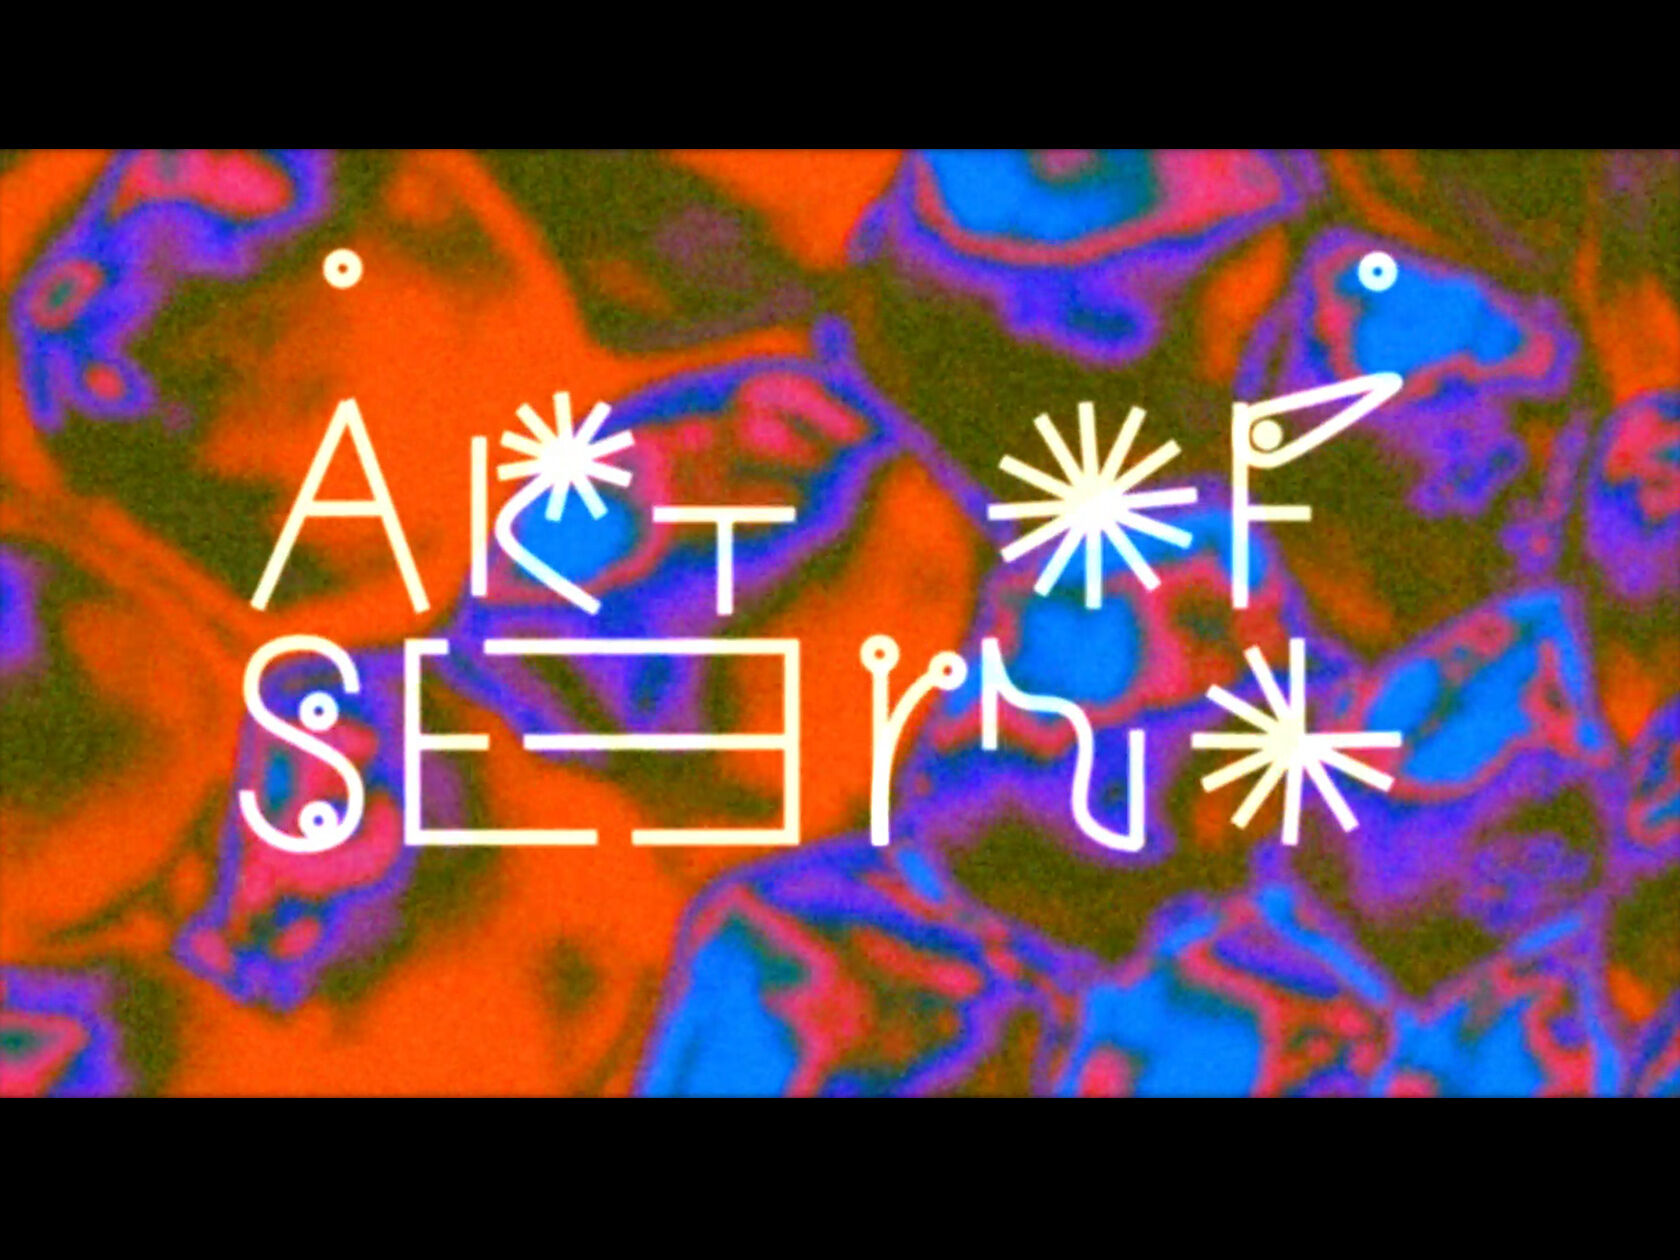 ‘Art of Seeing’ by Carter Fools and Lukas Keysell takes you on an audio-visual journey for the eyes and mind to wander through